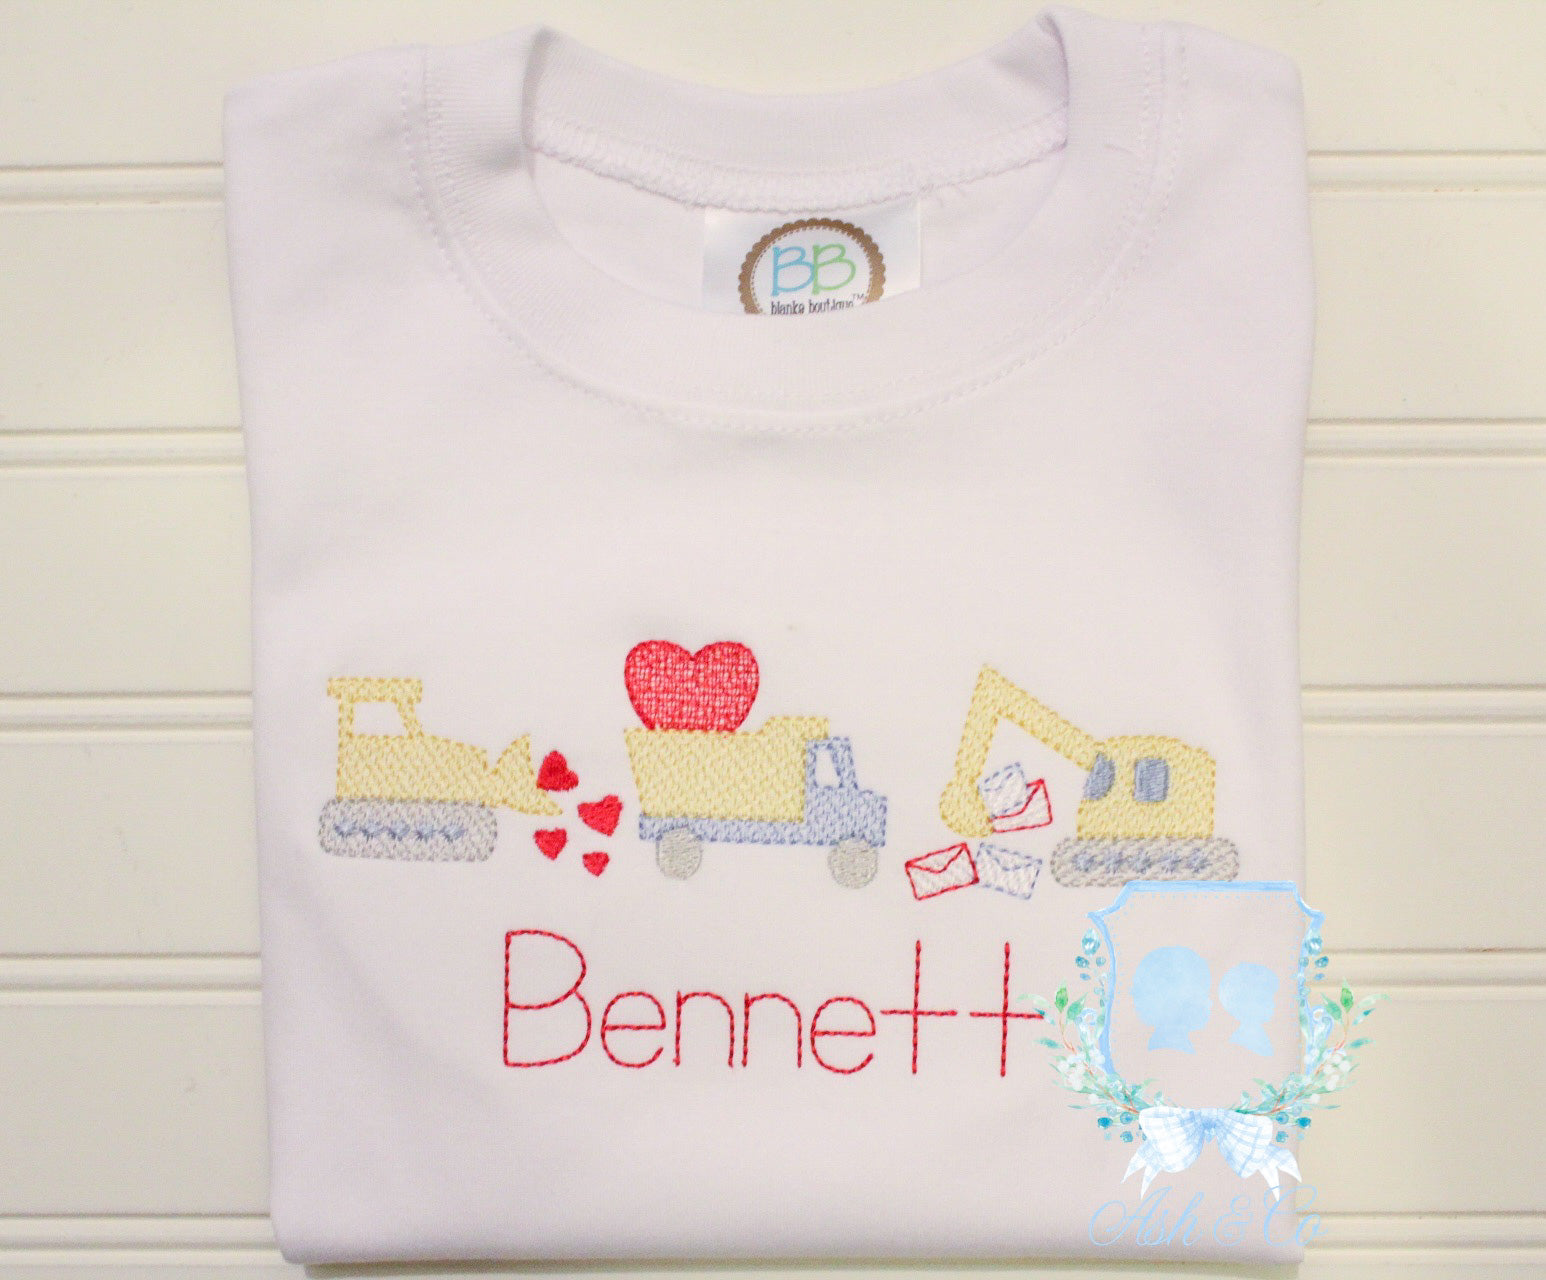 Boys - Construction W/ Hearts Embroidery Design